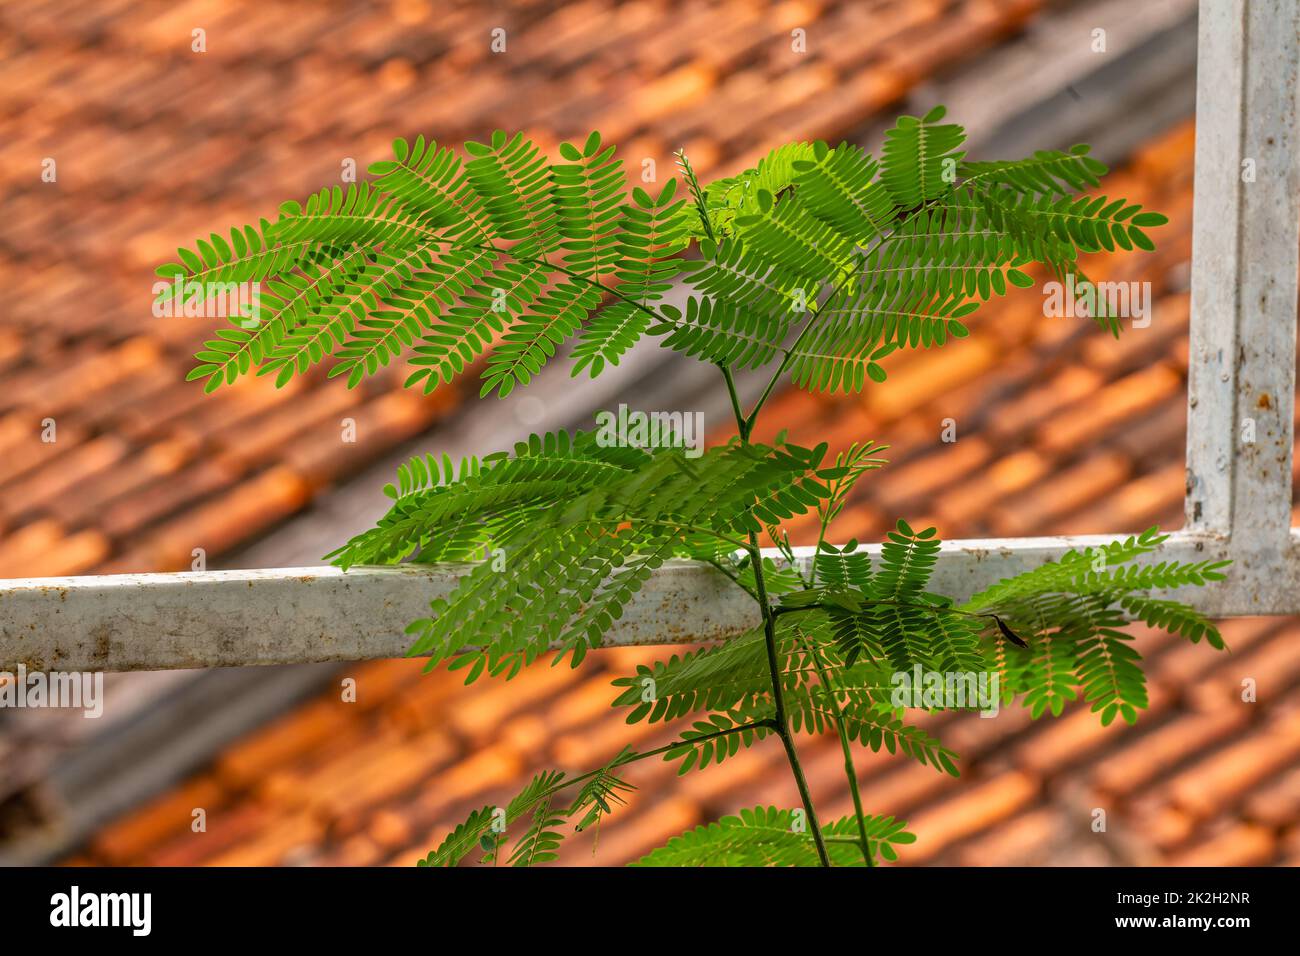 The leaves of the Leucaena leucocephala plant are small green in size attached to the stem, the background is a blurred brown earthen roof tile Stock Photo